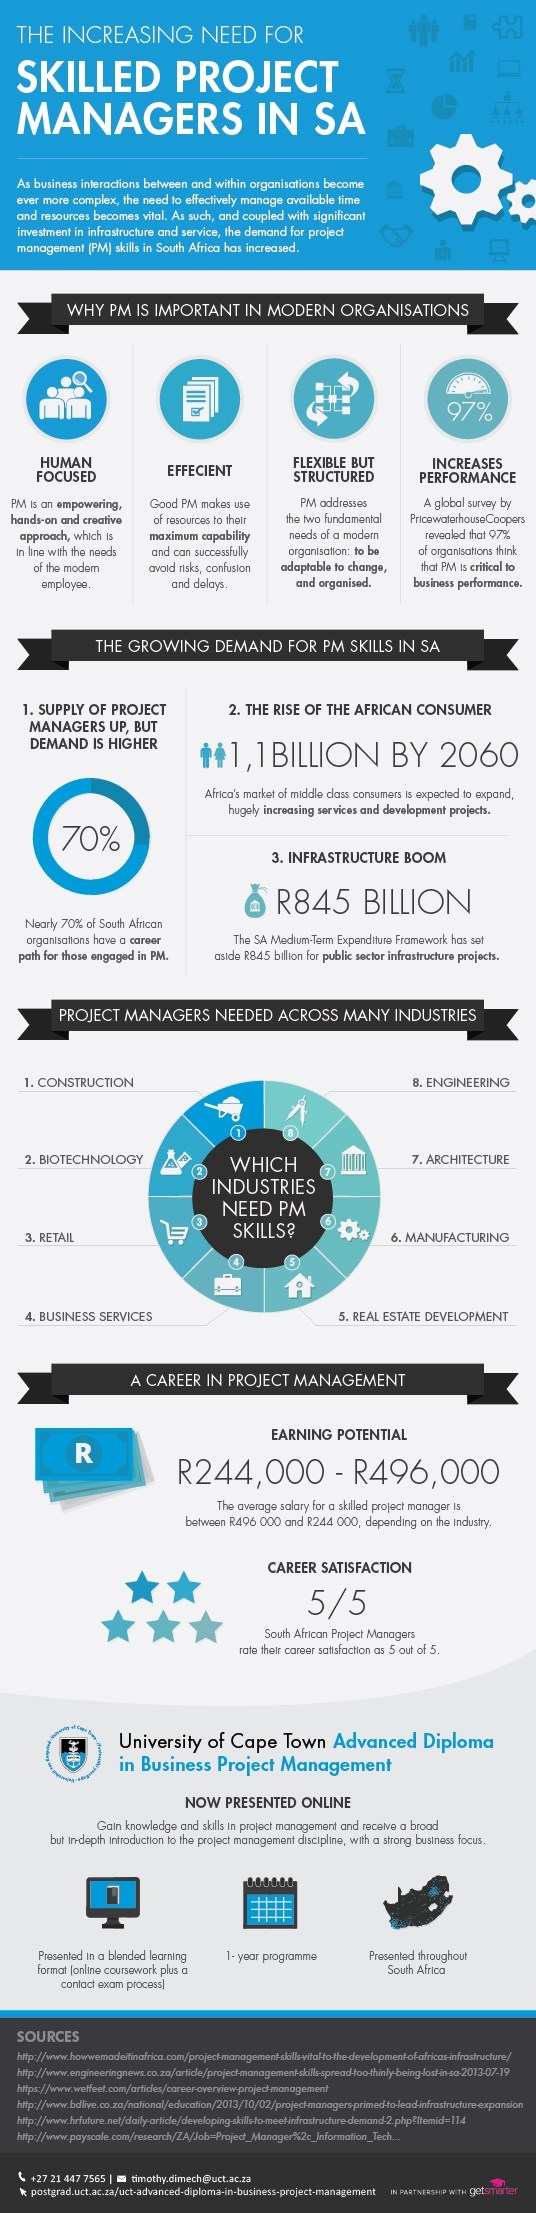 The need for skilled project managers in SA [Infographic]